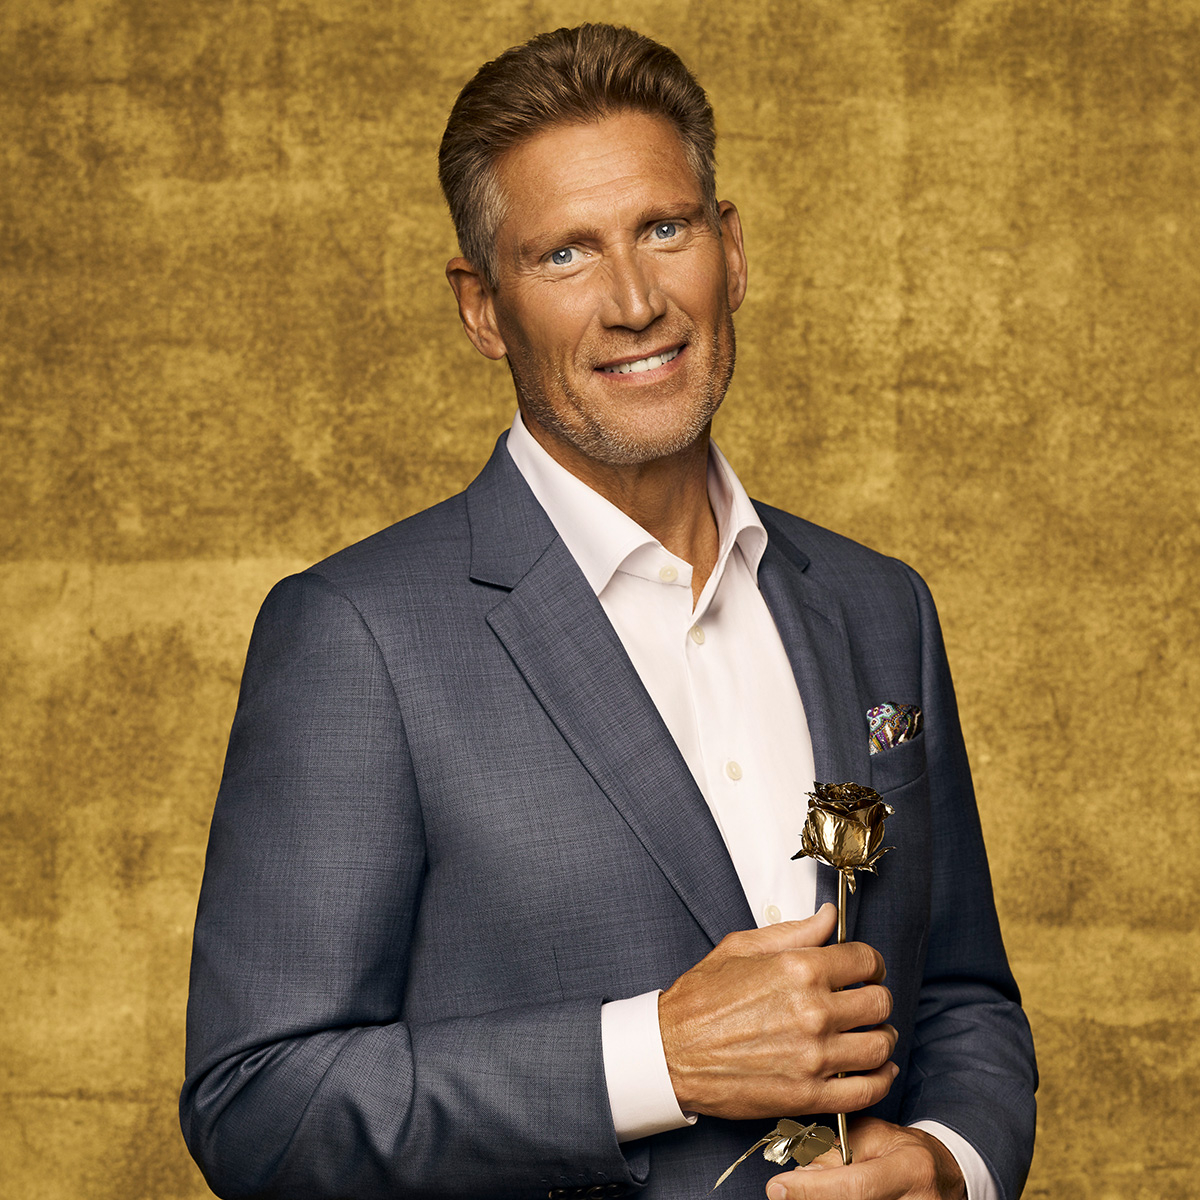 Gerry Turner Reacts to Golden Bachelor Contestant’s Superb Look